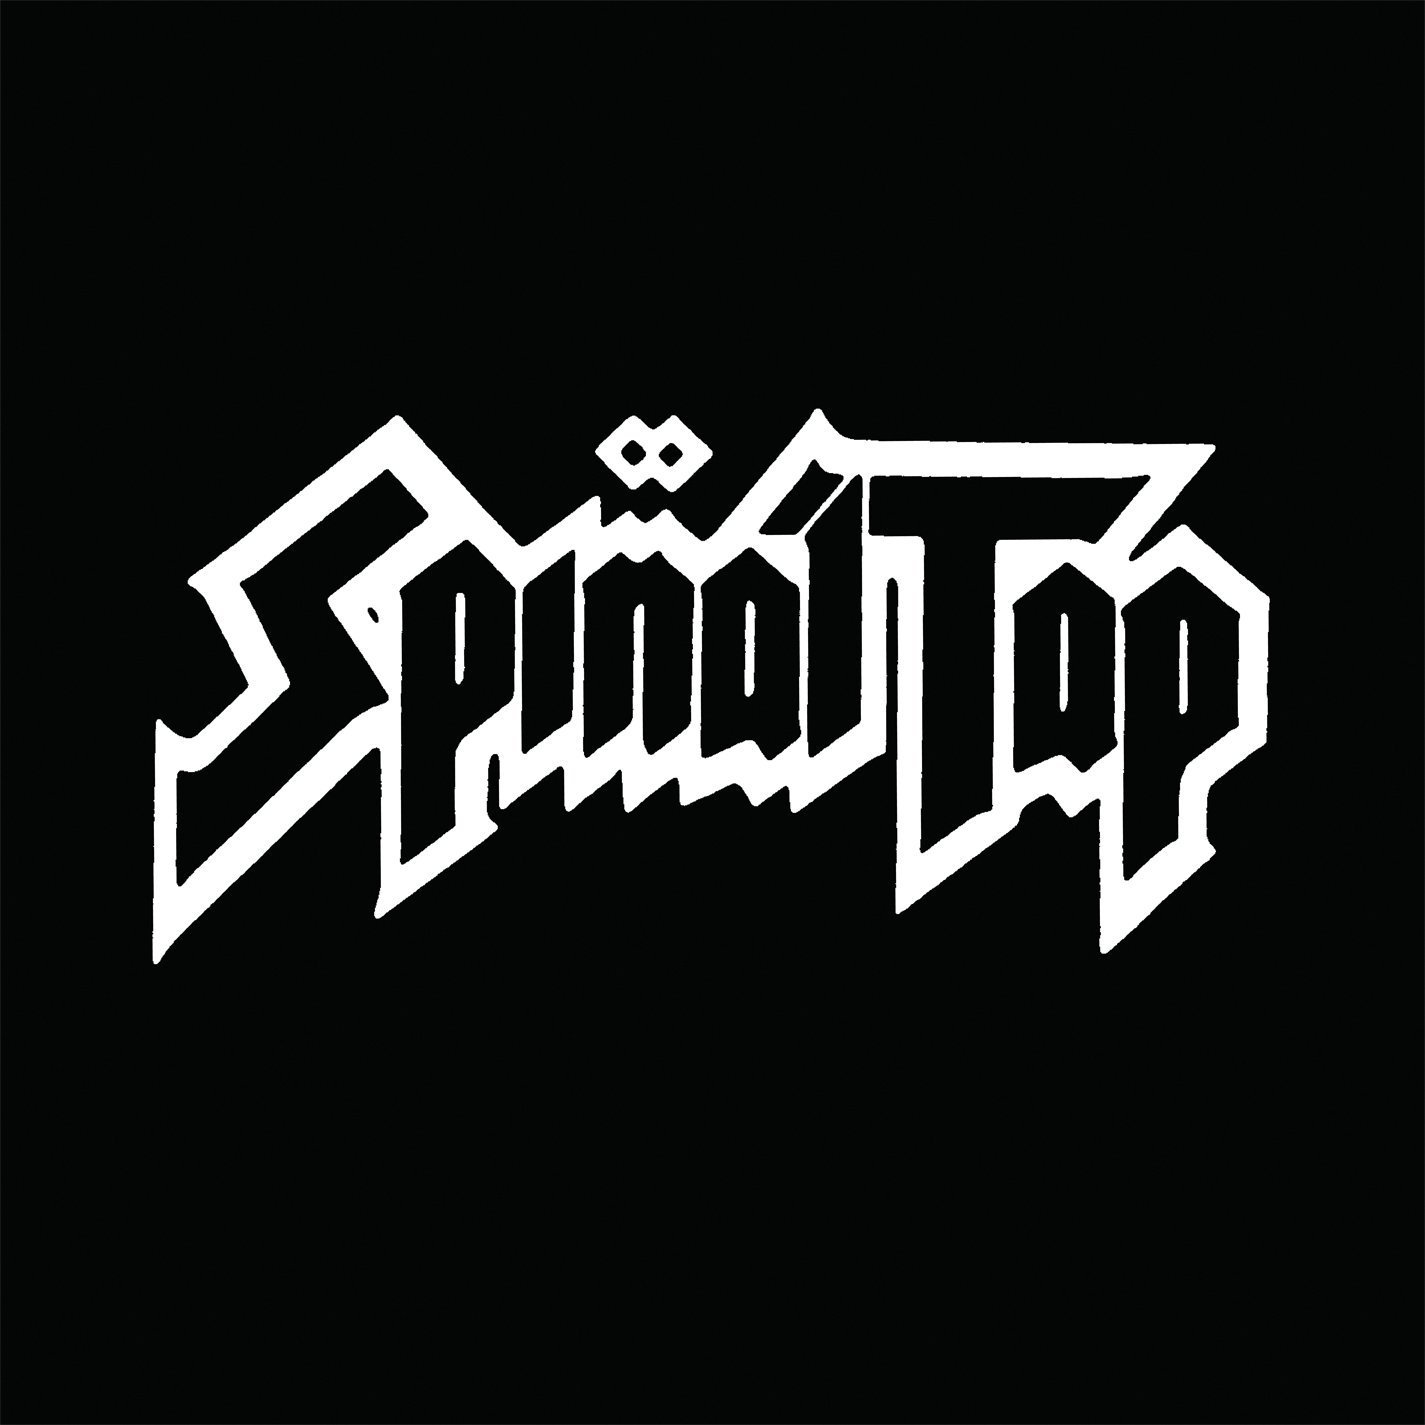 spinal tap 1 - This is Spinal Tap! Wallpaper (6683501 